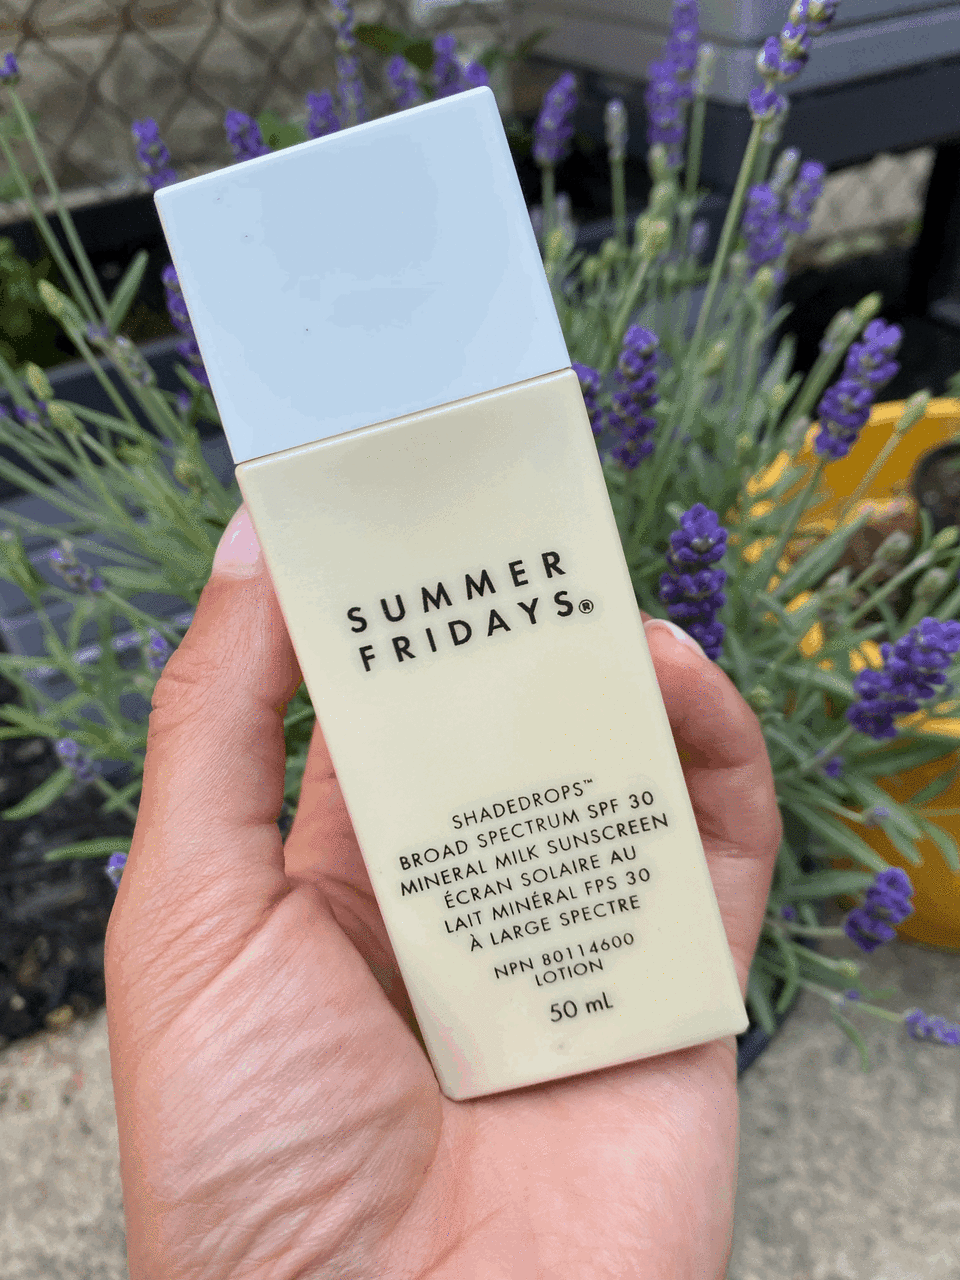 Searching for a face sunscreen? Read my review of the Summer Fridays ShadeDrops to find out why I'll be reapplying them throughout the summer. 